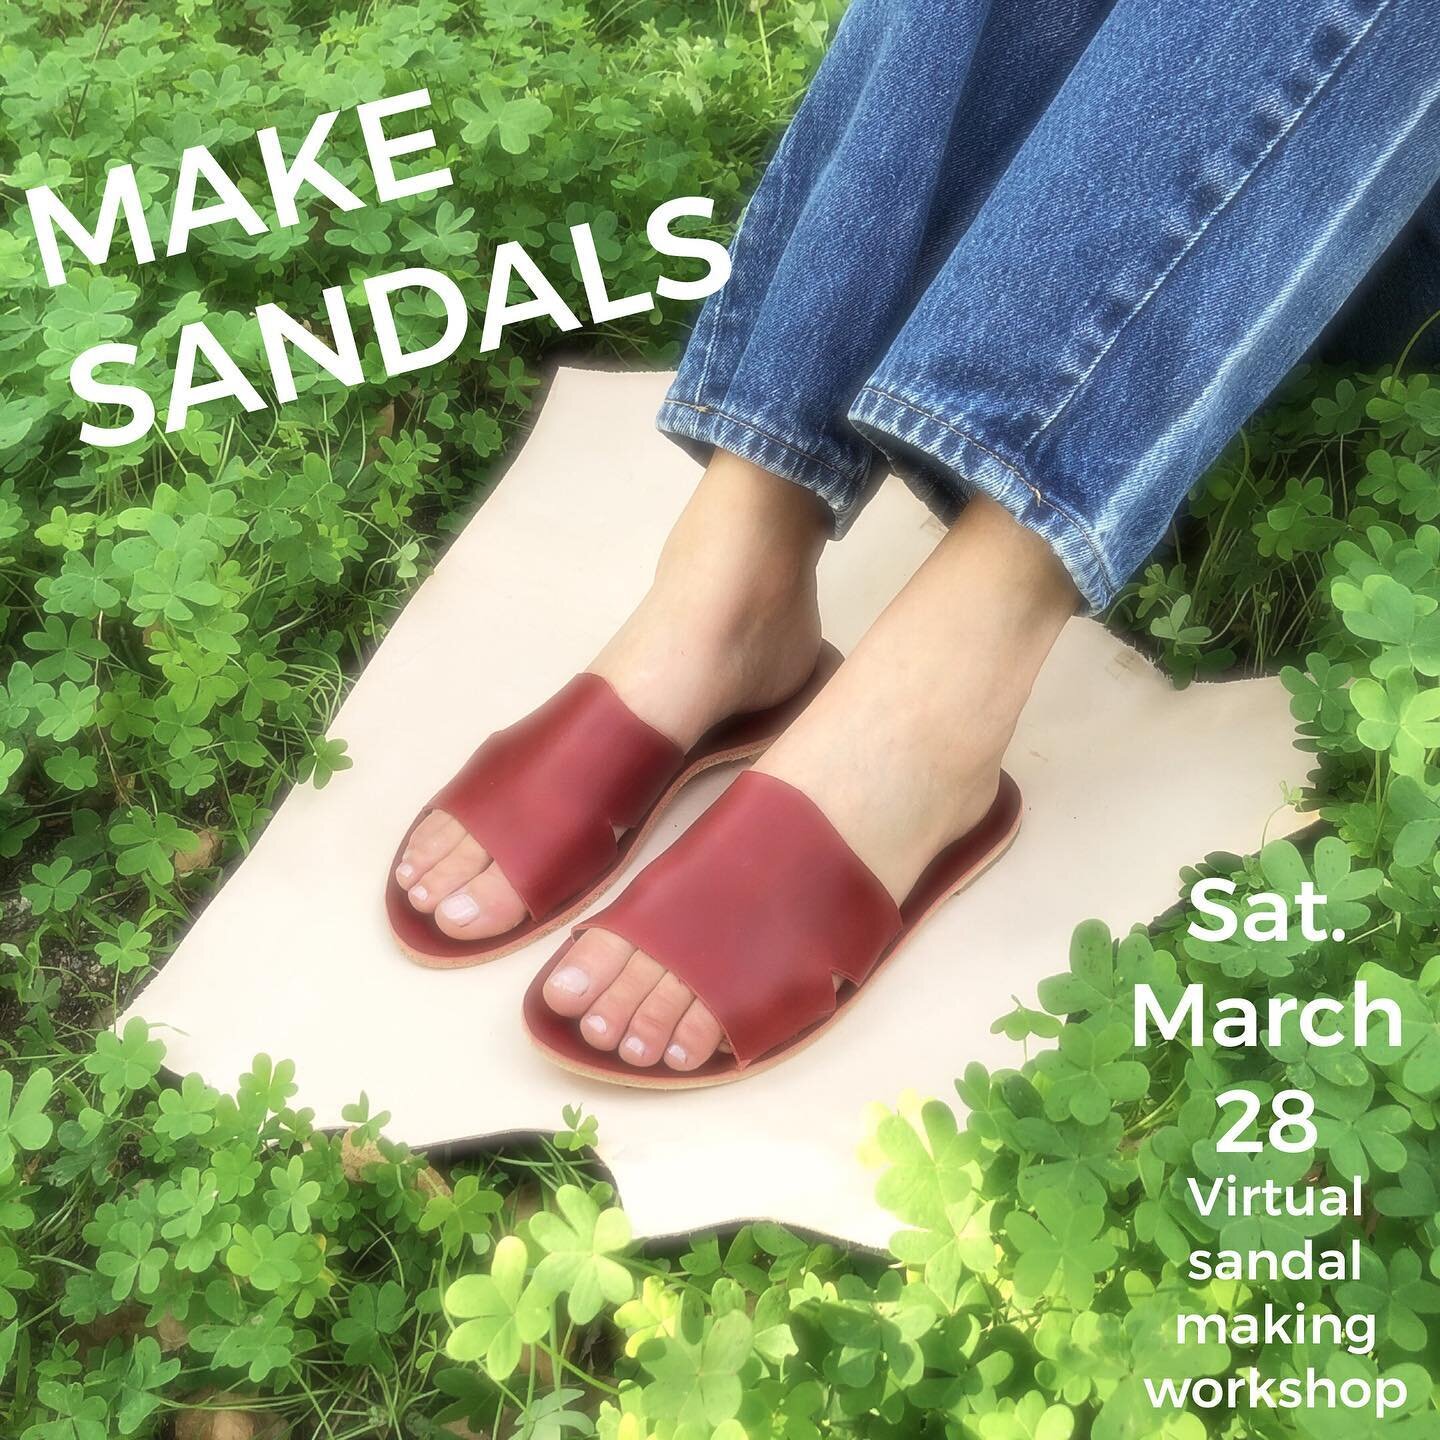 the first sandal making workshop of the season is on the calendar for Saturday March 28th. Link in profile to sign up 🍀